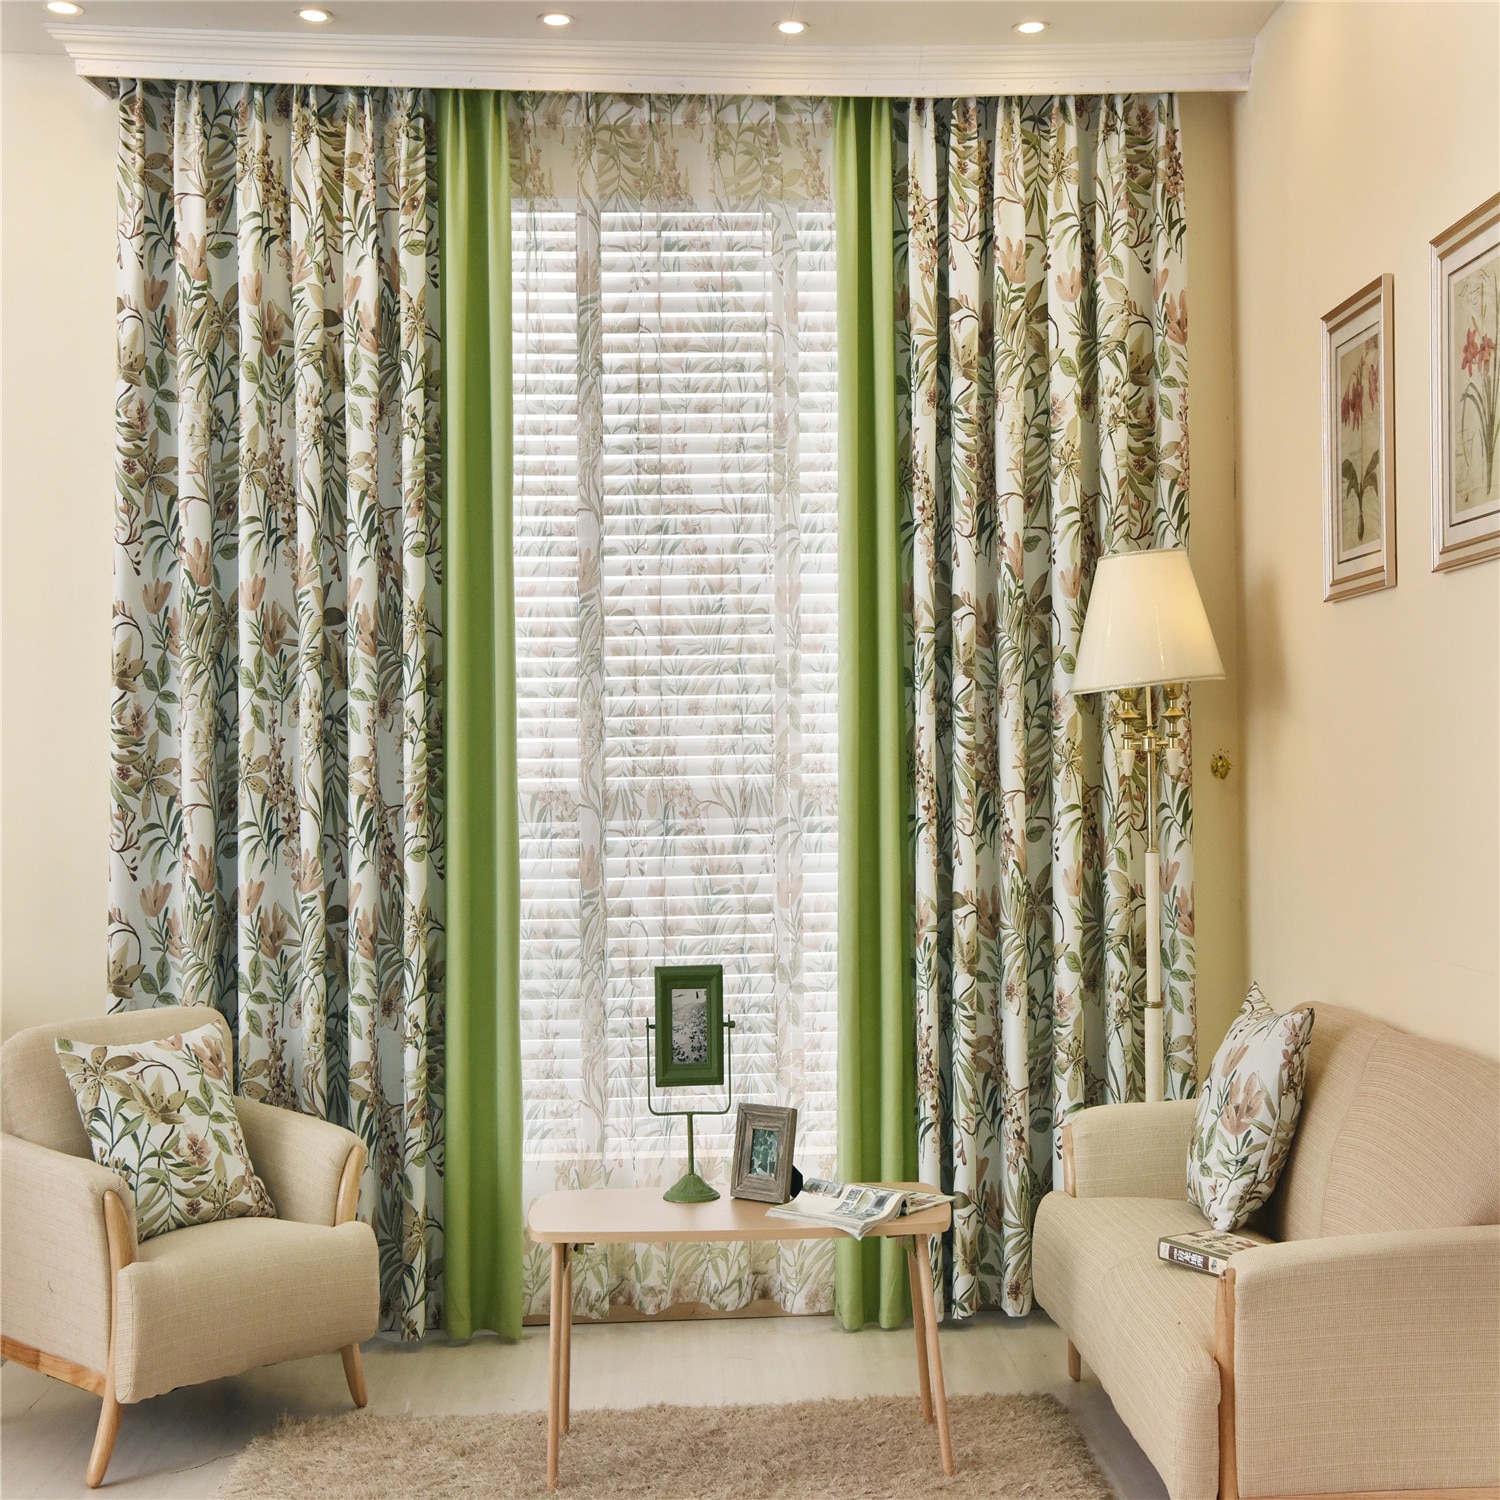 Beautiful Printed Blackout Curtains For Living Roo..